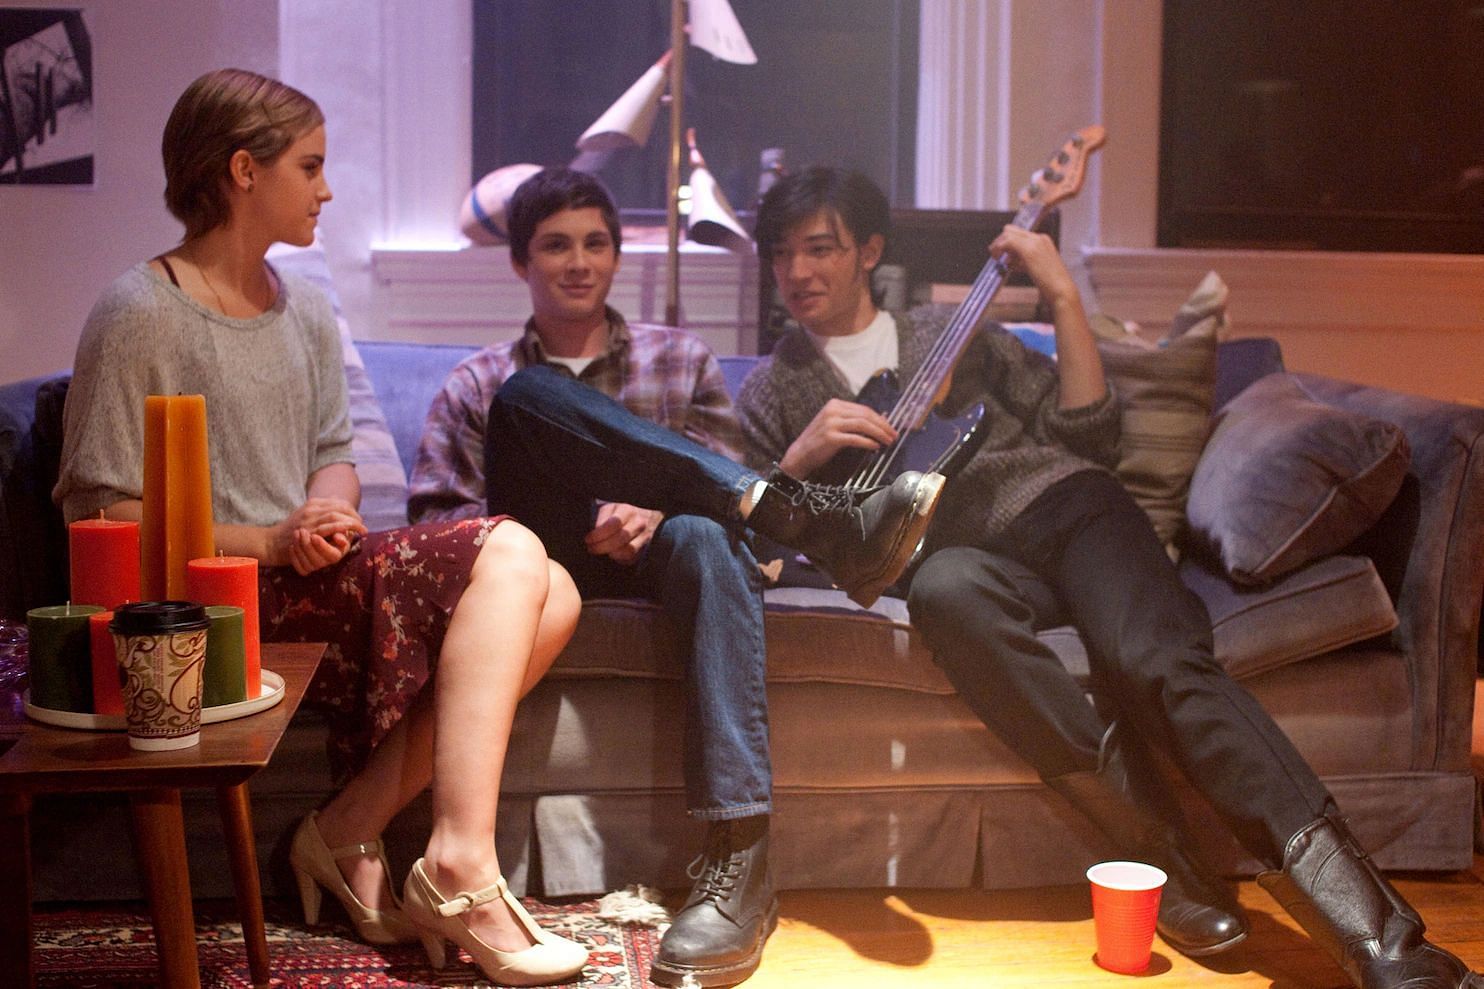 The Perks of Being a Wallflower (Image via Summit Entertainment)